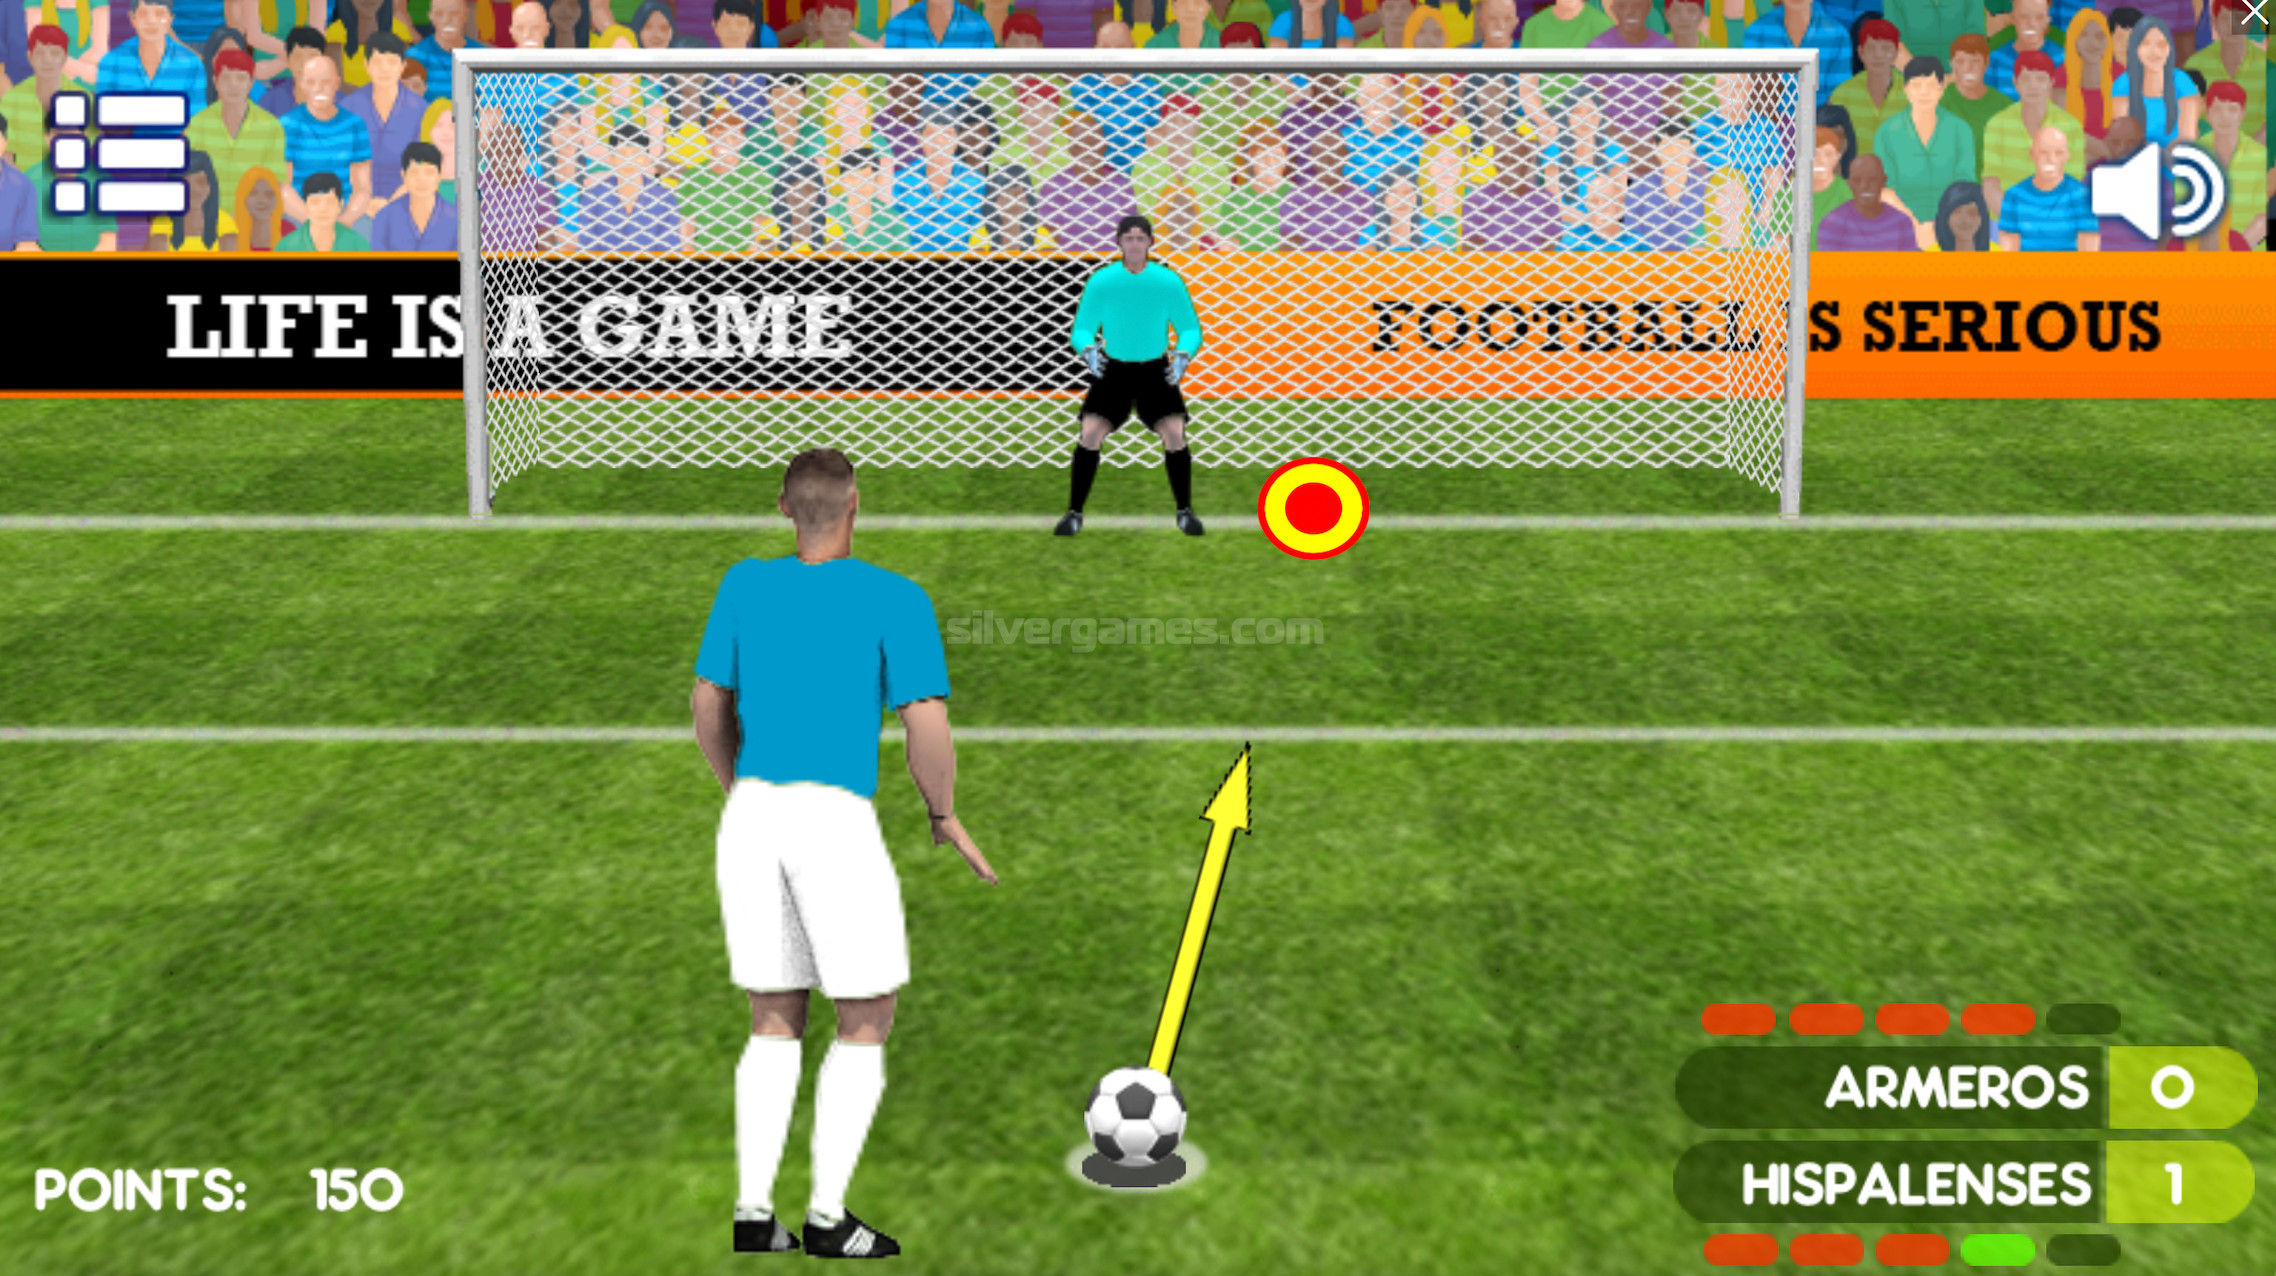 Penalty Shooters 2 (Football) - Apps on Google Play